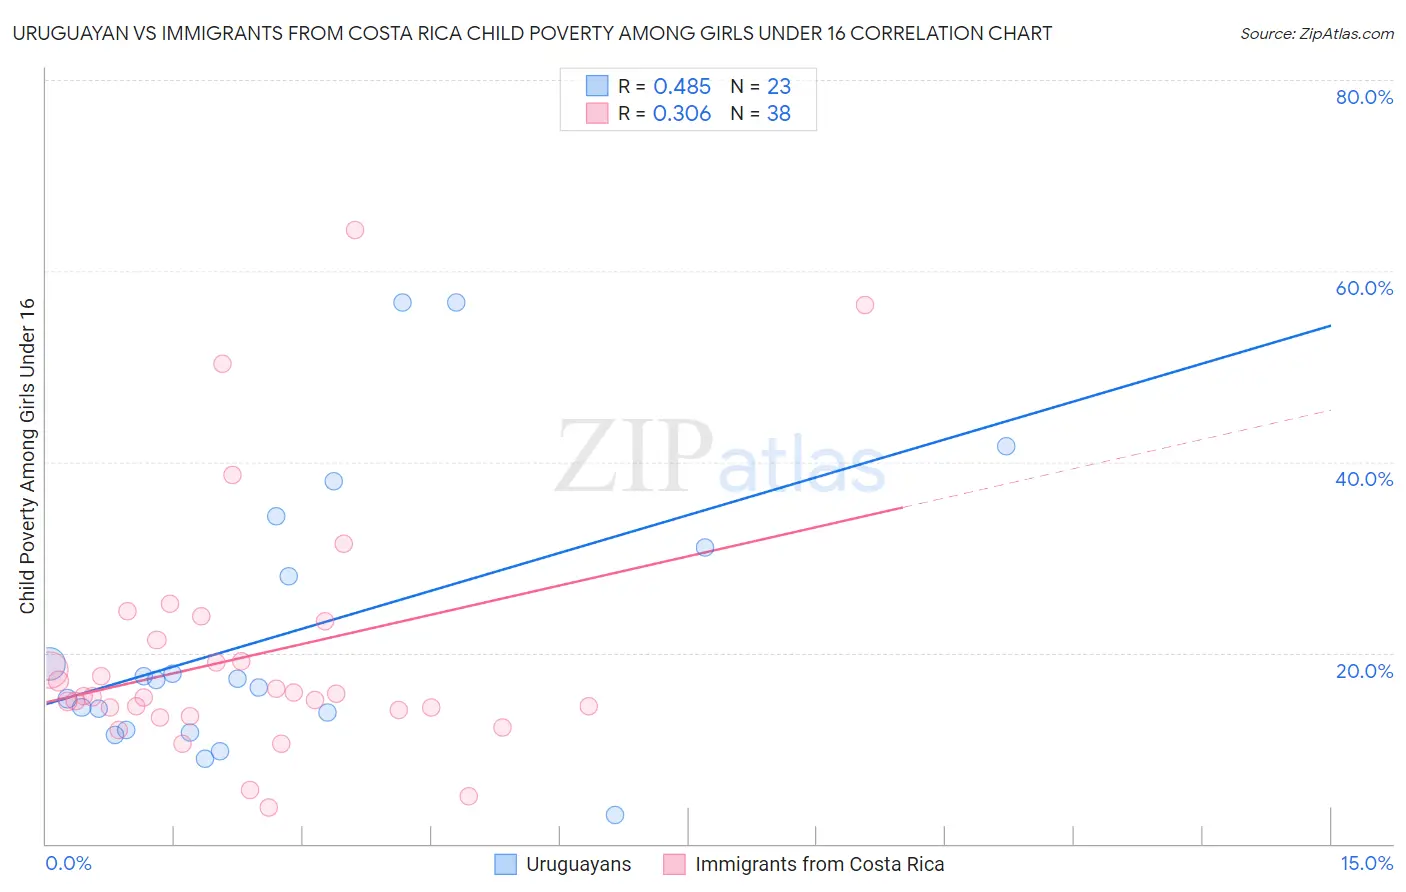 Uruguayan vs Immigrants from Costa Rica Child Poverty Among Girls Under 16